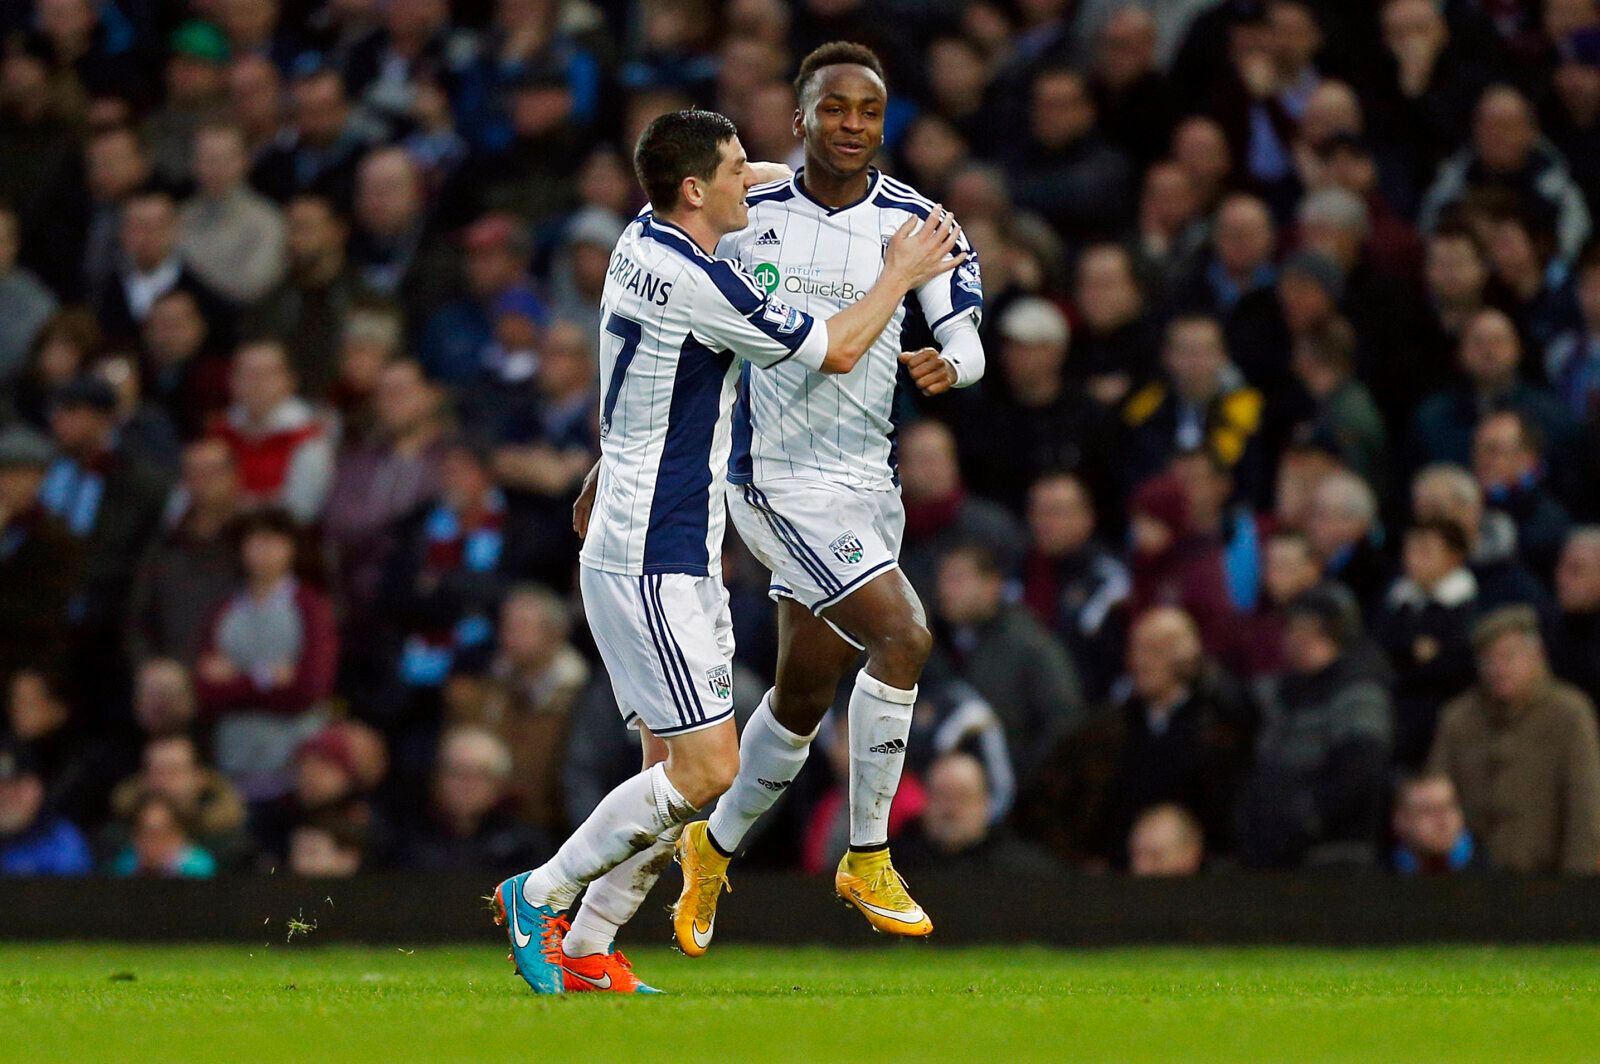 Football - West Ham United v West Bromwich Albion - Barclays Premier League - Upton Park - 1/1/15 
West Brom's Saido Berahino (R) celebrates scoring their first goal with Graham Dorrans 
Mandatory Credit: Action Images / Paul Harding 
Livepic 
EDITORIAL USE ONLY. No use with unauthorized audio, video, data, fixture lists, club/league logos or 